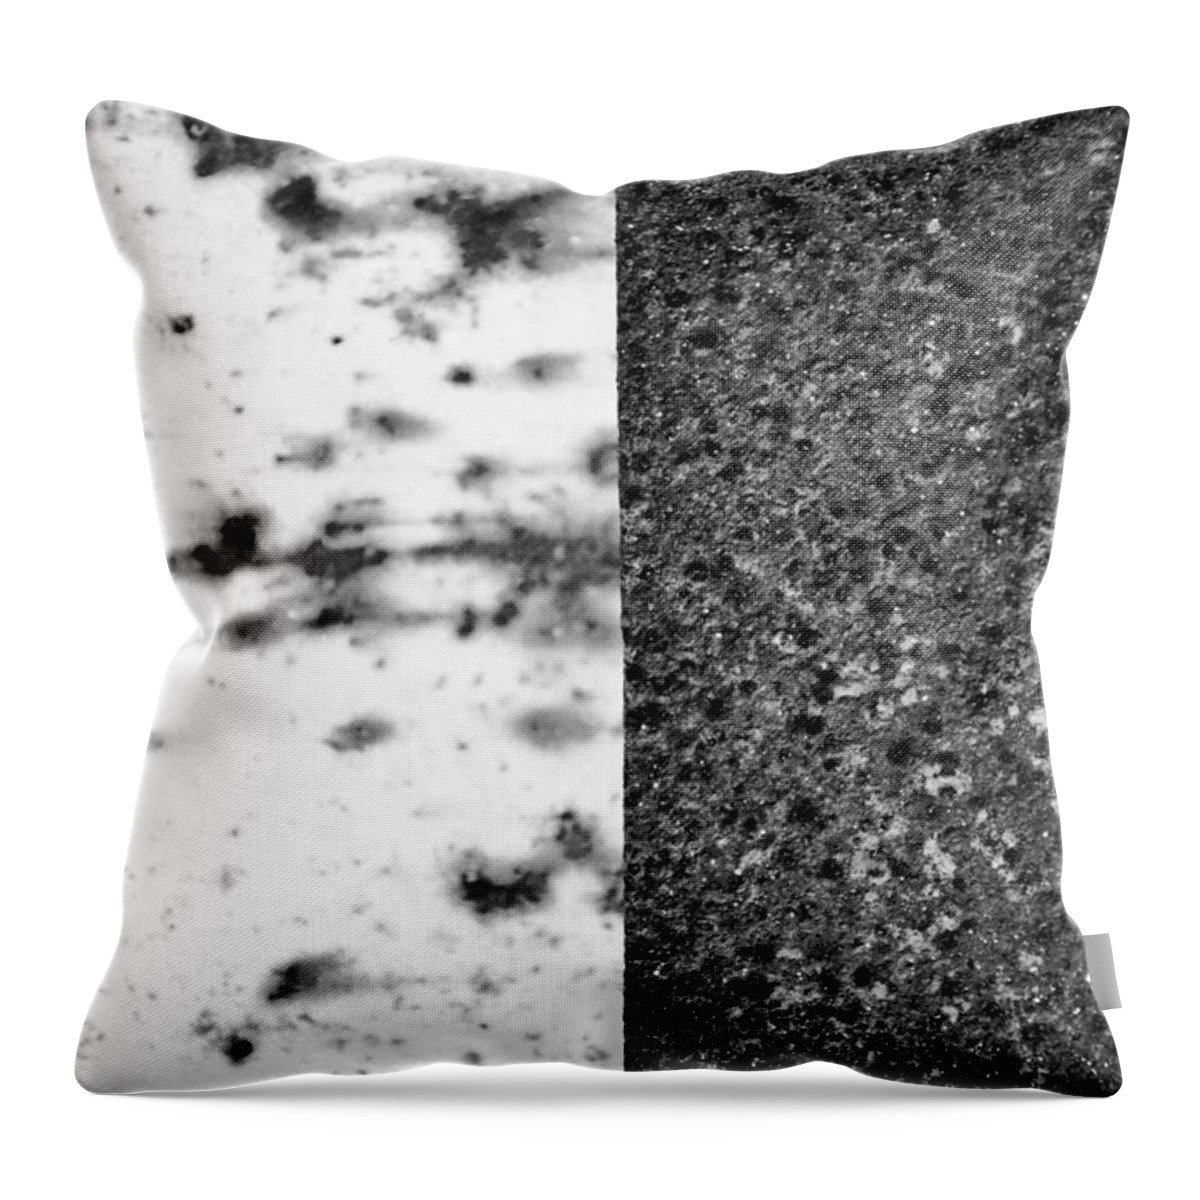 Dichotomy Throw Pillow featuring the photograph Dichotomy by Tom Druin